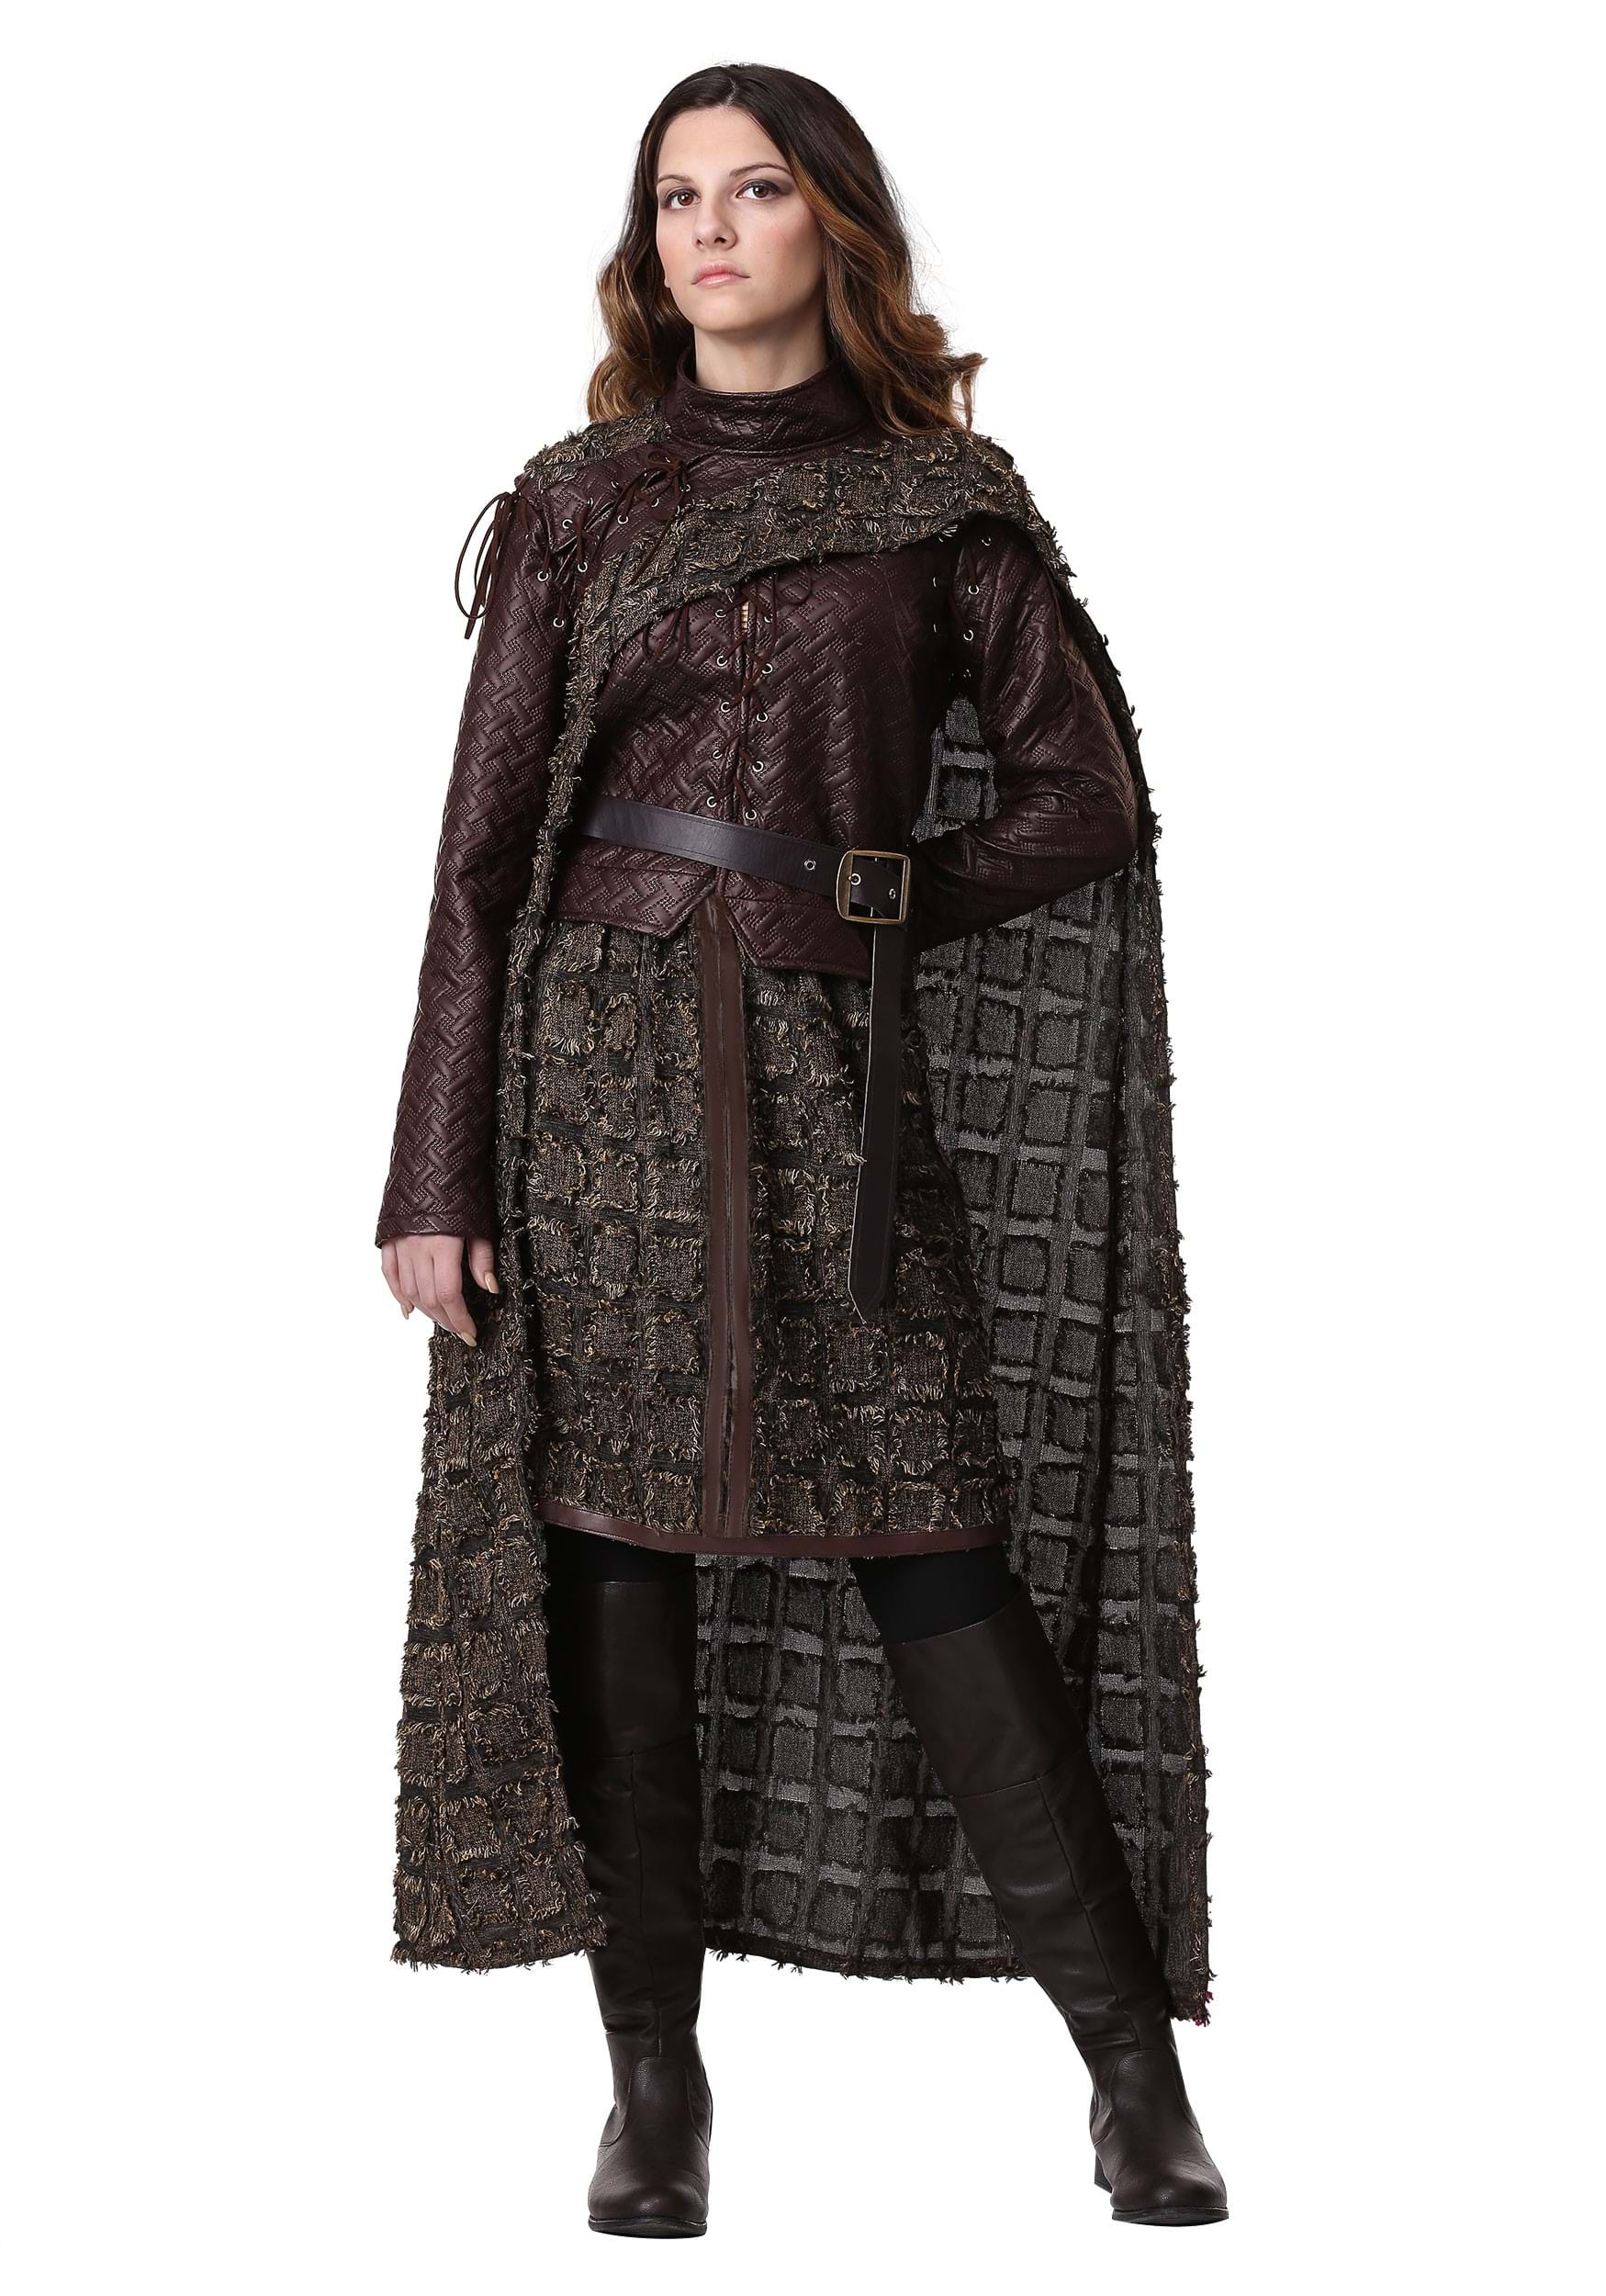 Image of Women's Winter Warrior Costume with Cape & Jacket ID FUN6363AD-L